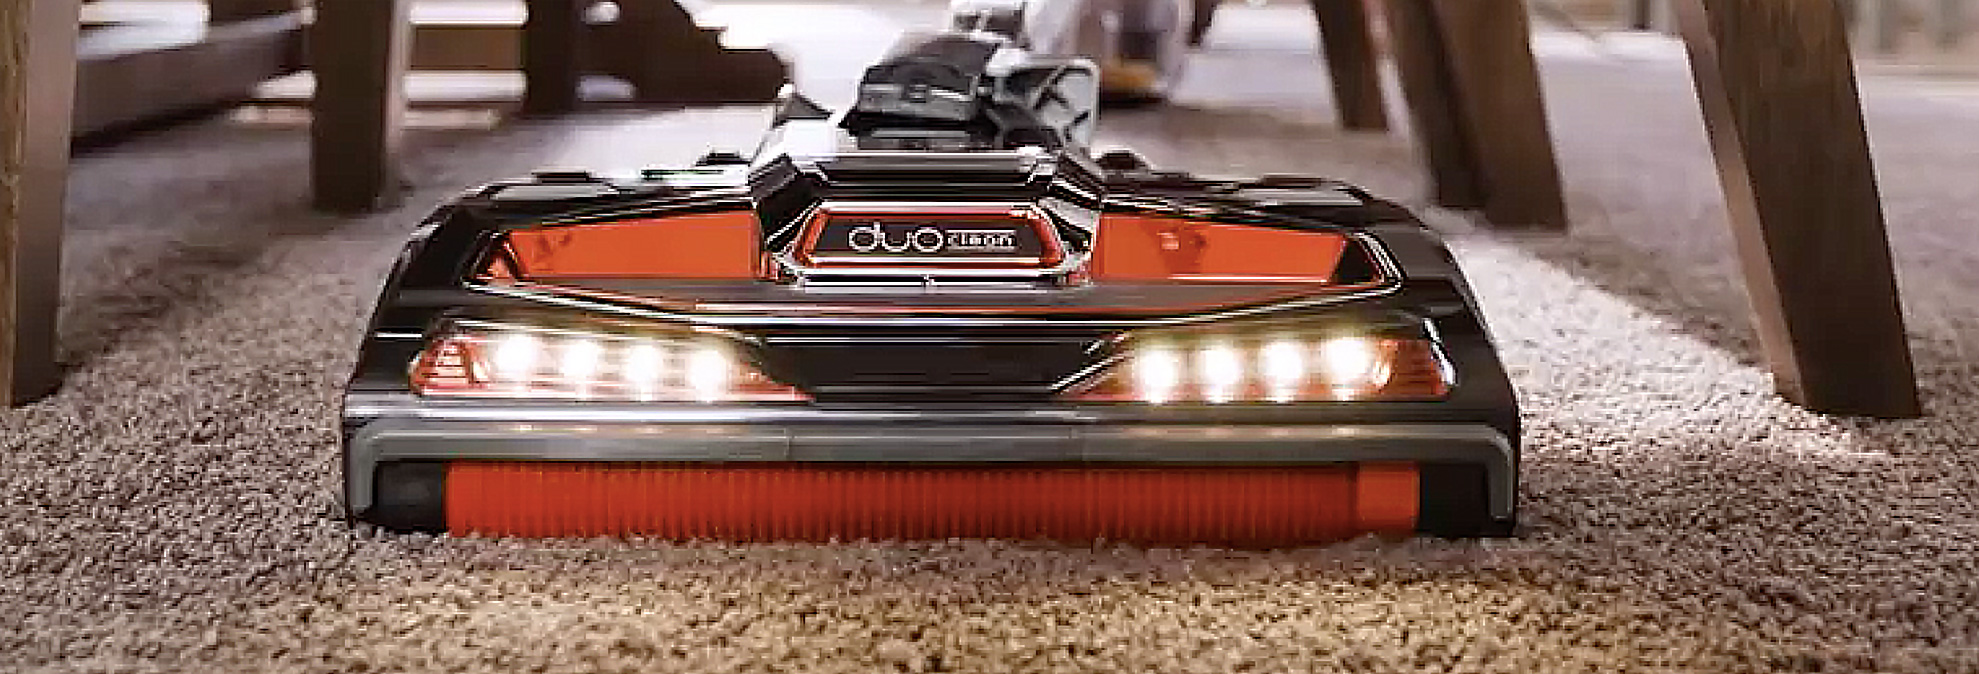 Best Stick Vacuums for Busy Households Consumer Reports